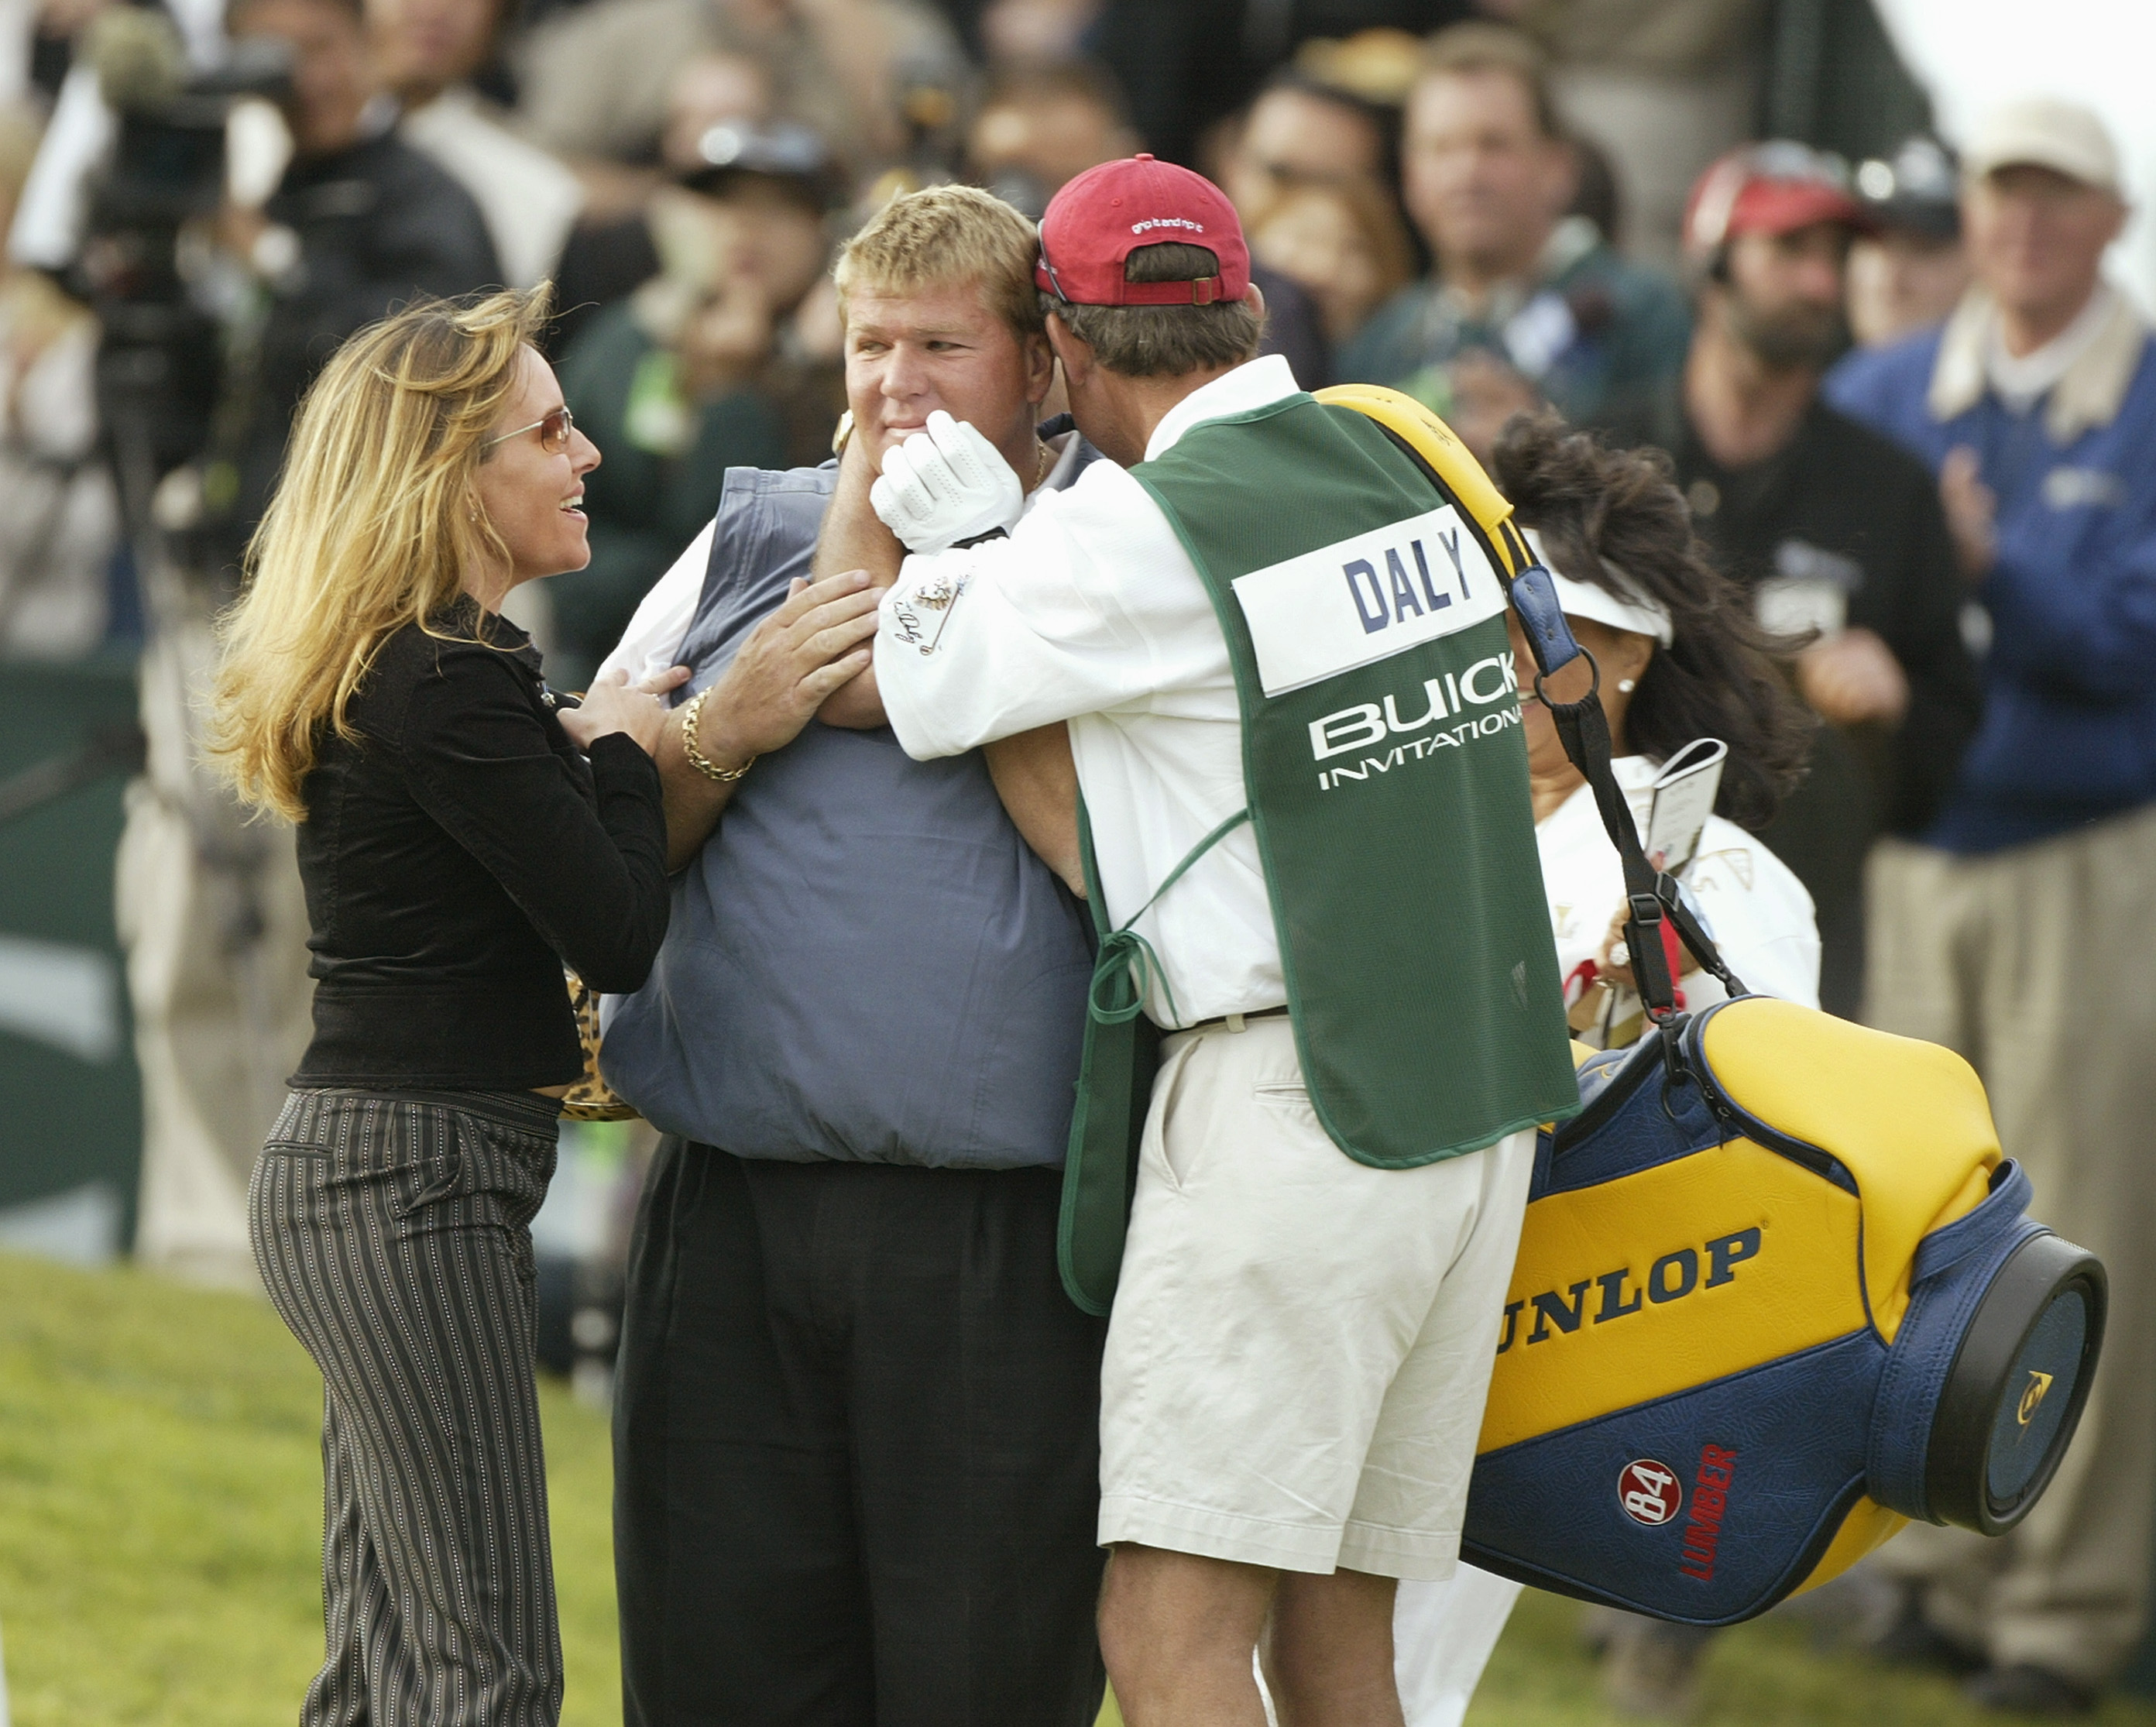 John Daly with his wife Sherrie Daly and caddie after winning the 2004 Buick Invitational